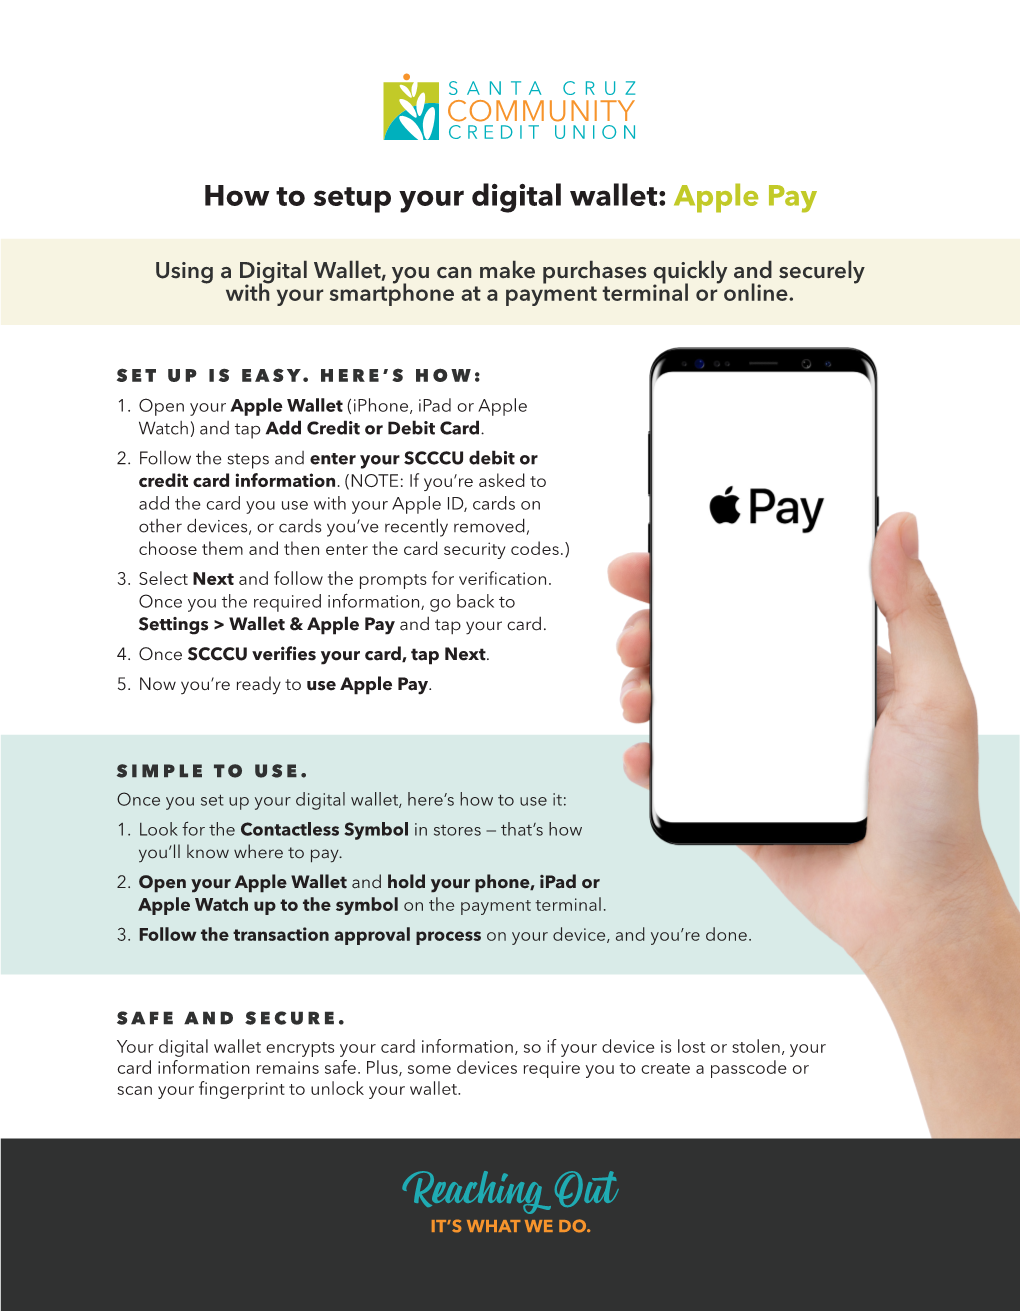 How to Setup Your Digital Wallet: Apple Pay